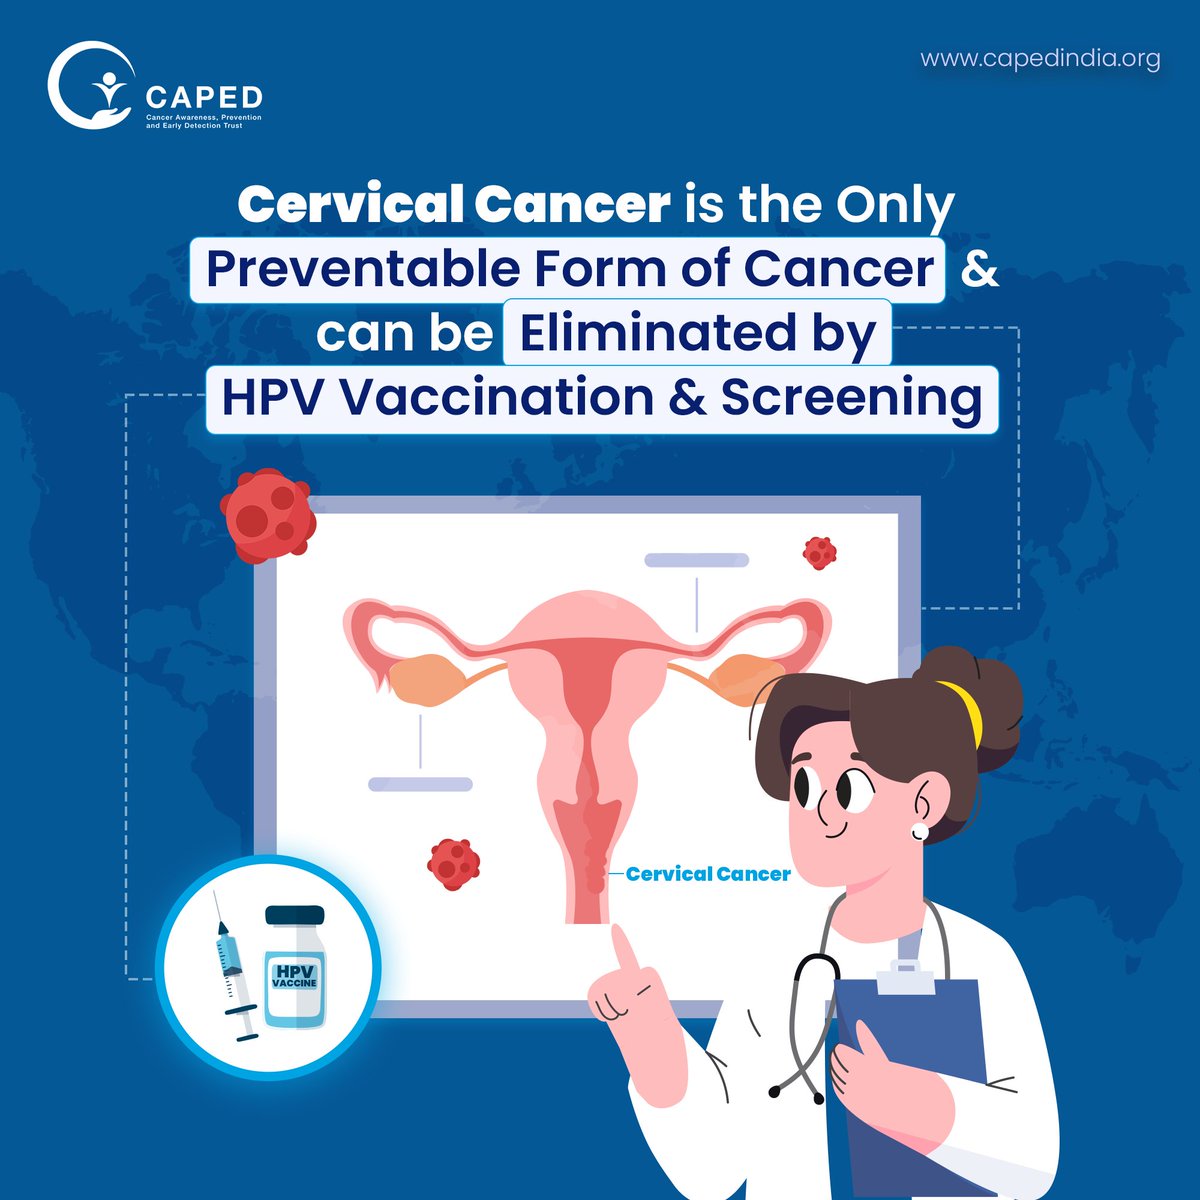 The recent pandemic, has brought to surface the value of vaccination & immunity in preventing diseases.
Education, awareness & proactive measures are crucial in averting diseases.
Cervical cancer, a preventable illness, can be eliminated through timely #HPVvaccination & screening